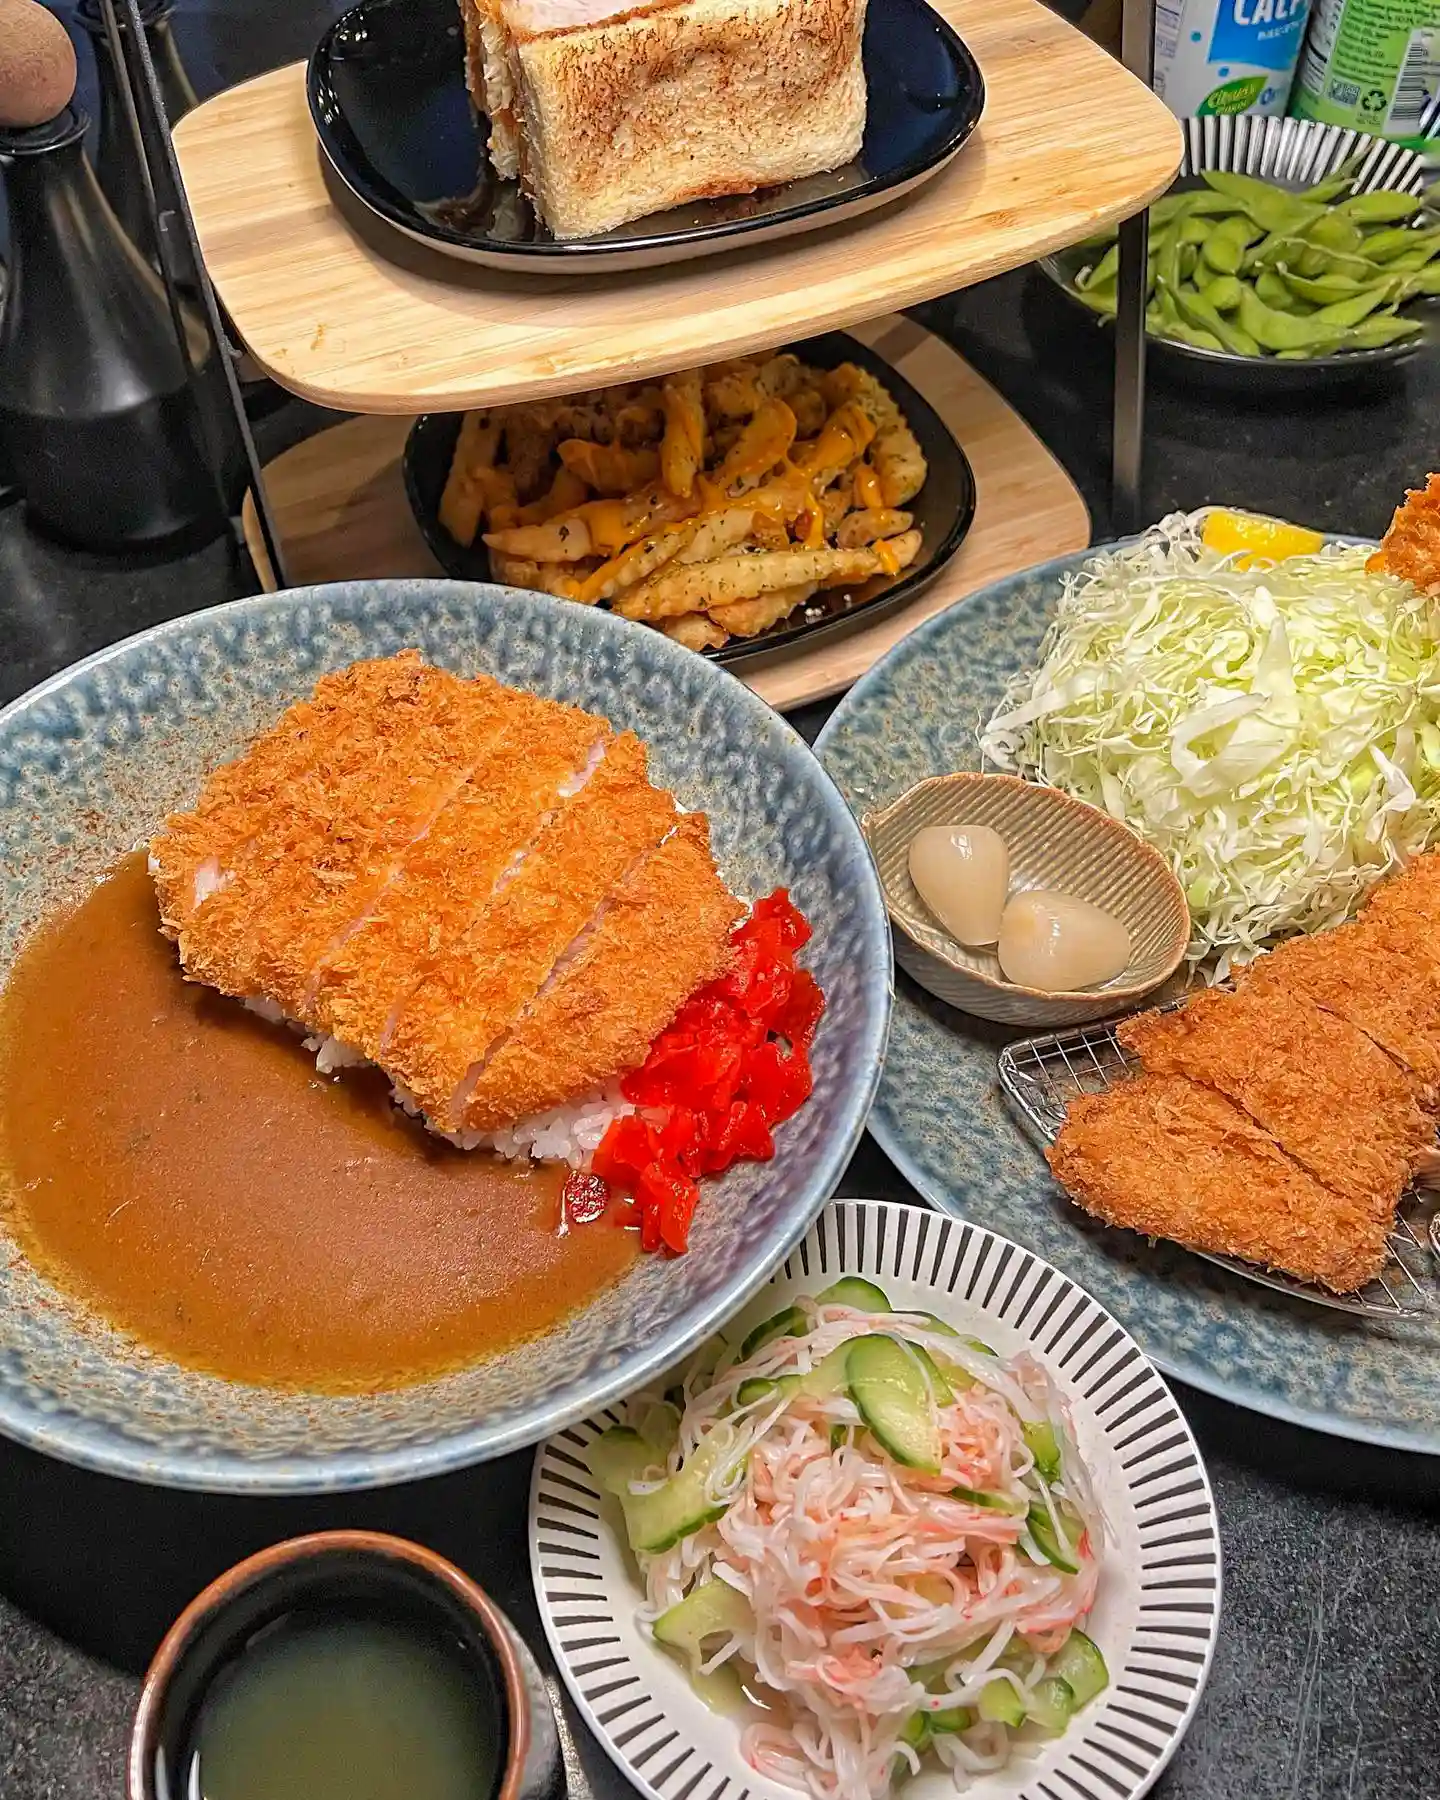 Assorted dishes from Kiyoshi's Katsu House, including tonkatsu, katsu curry, and french fries, beautifully plated and garnished